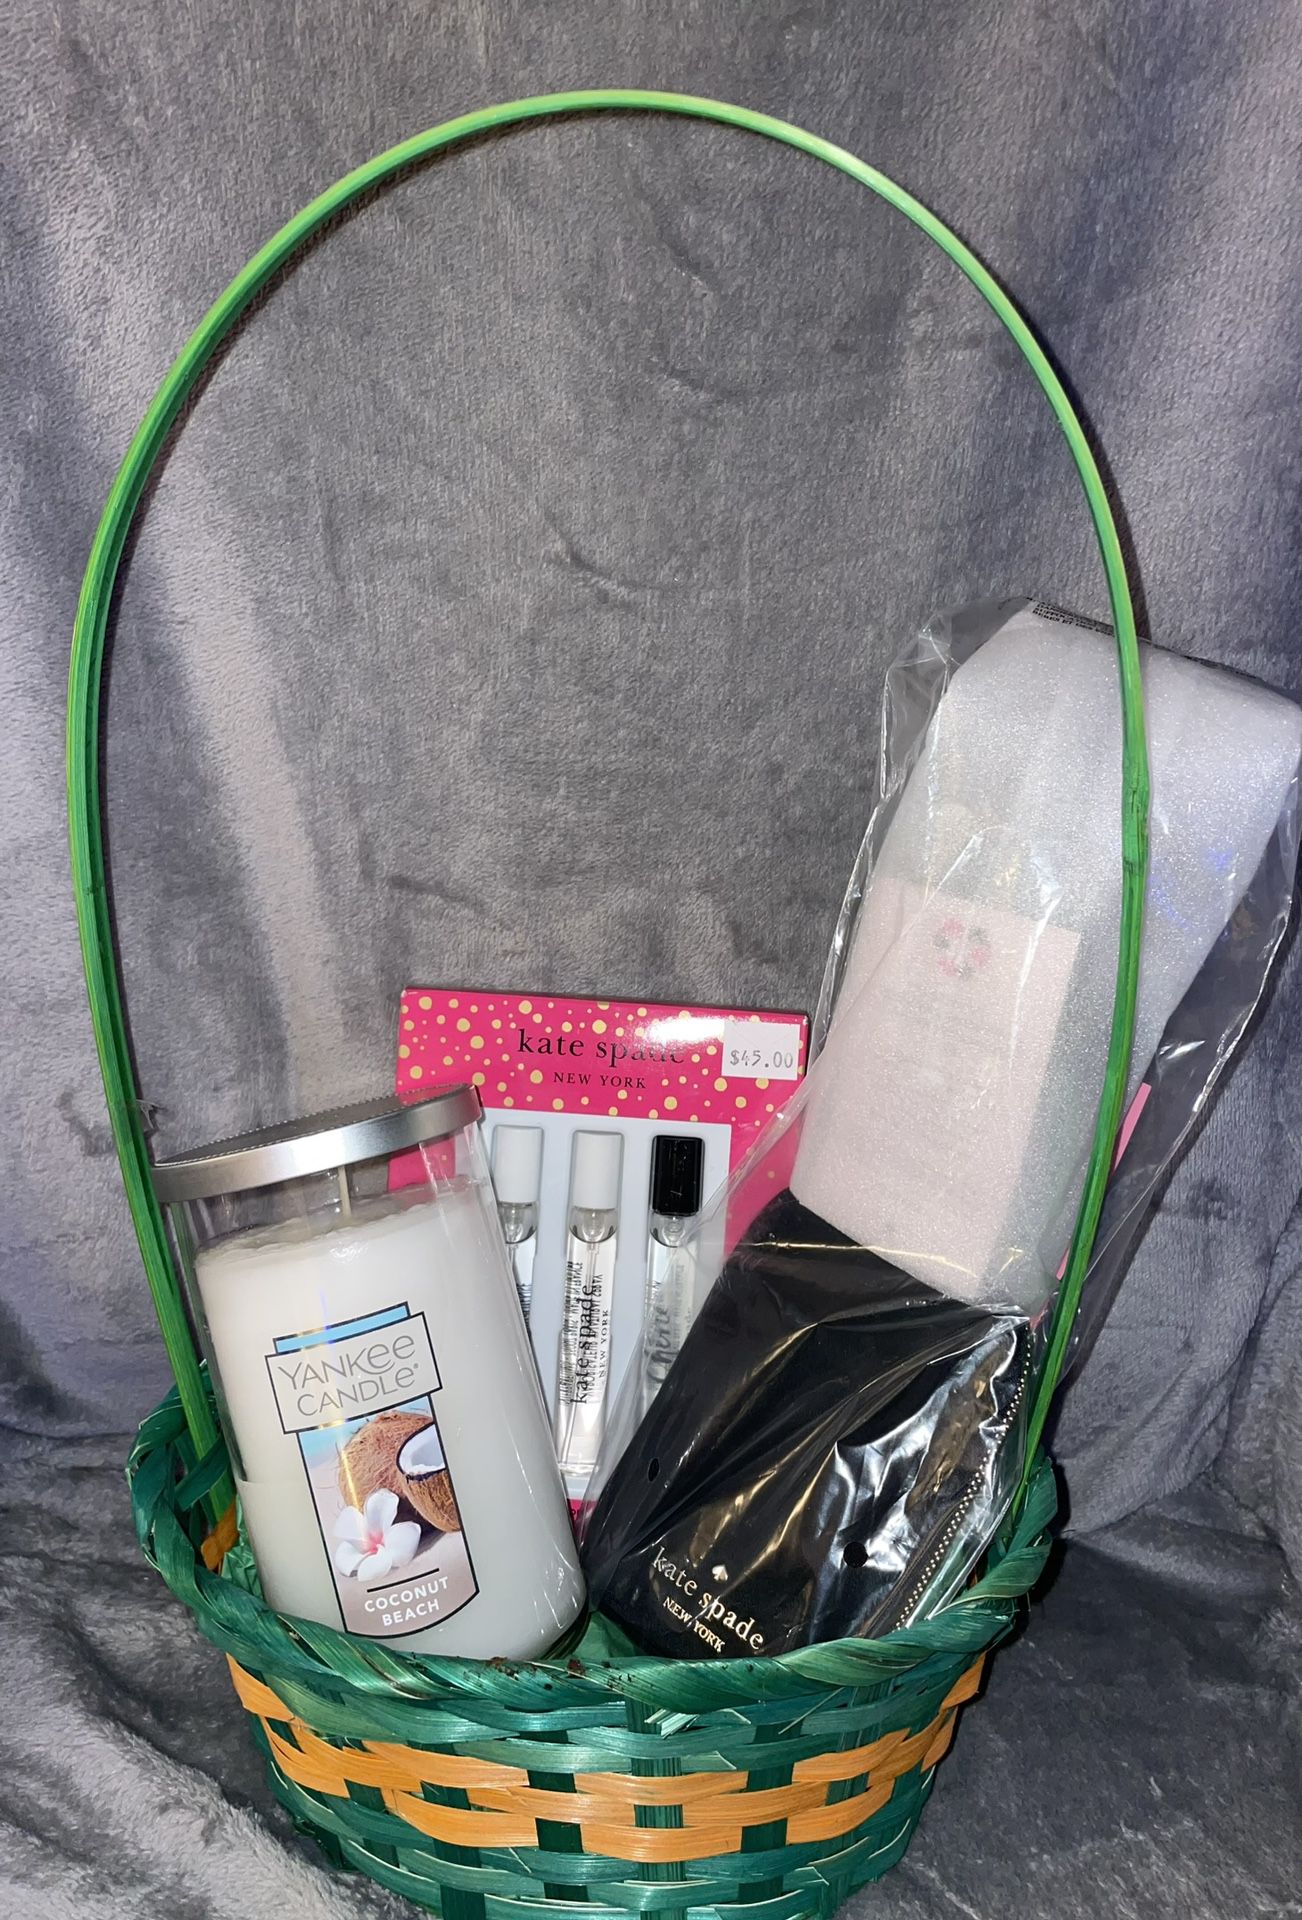 $75 Firm Gift Basket Lot New Kate Spade Lanyard Wallet & 3 Pc Perfumes With Yankee Candle 